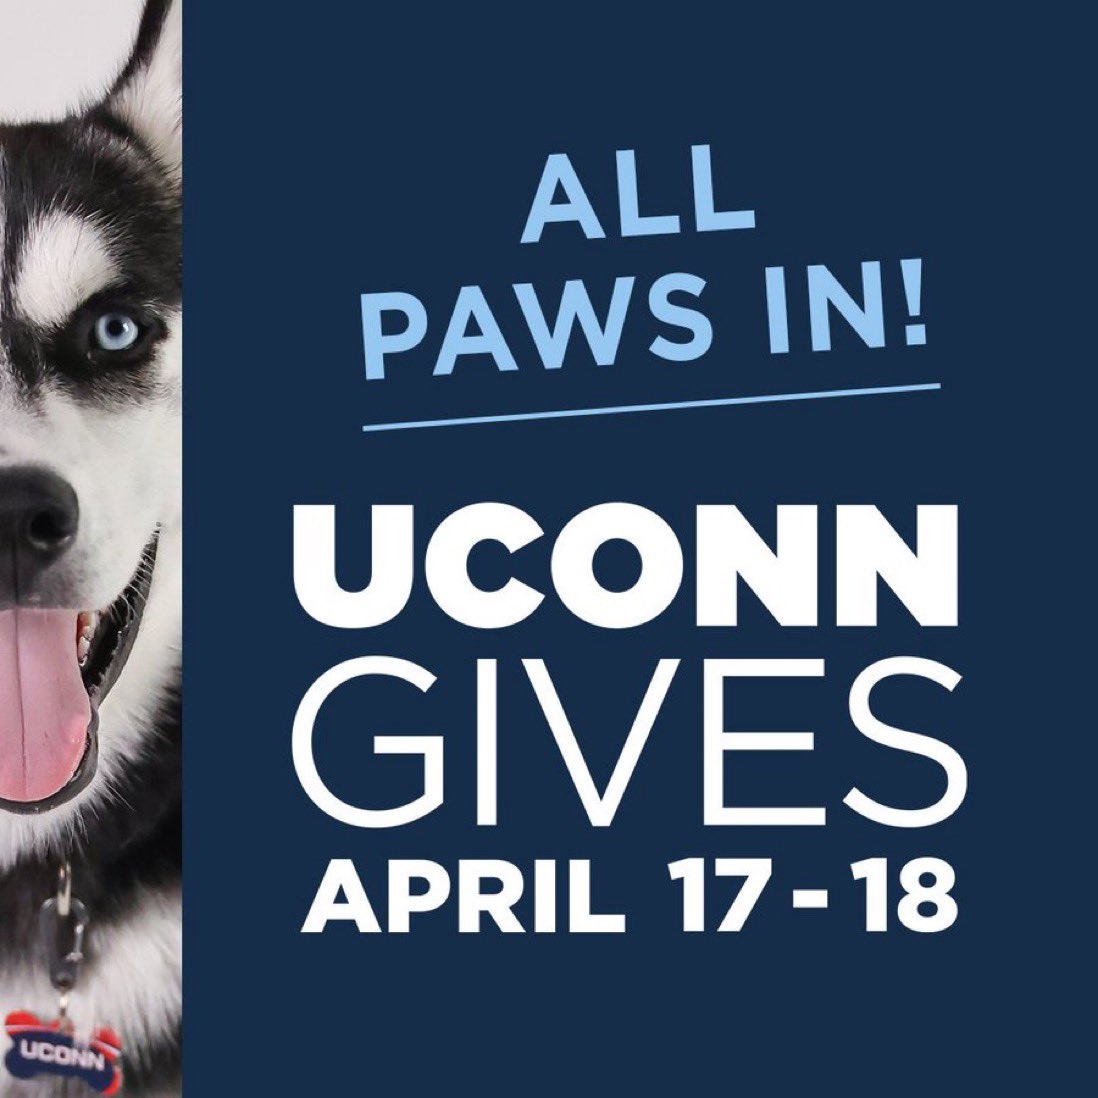 Less than two hours left for #UConnGives. Please consider donating to any of the three Neag School funds. Thank you! #UConnGives: brnw.ch/21wIXaB